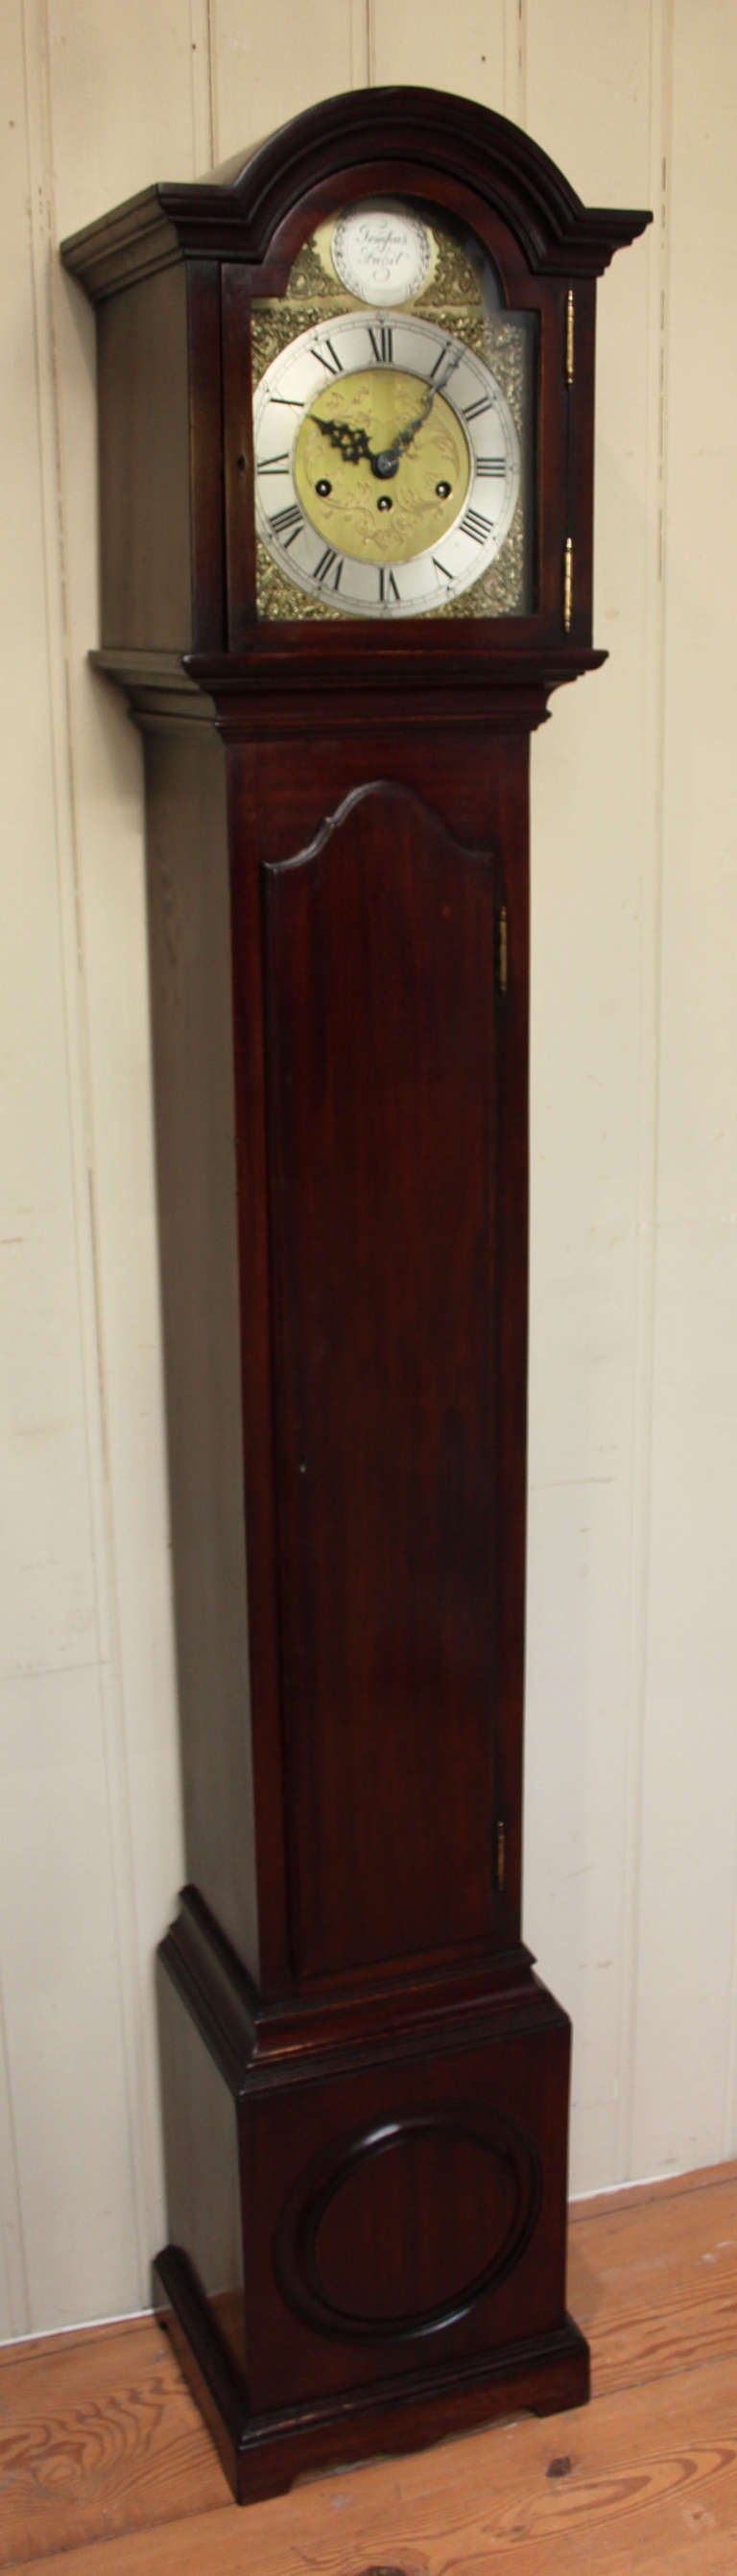 An attractive and well proportioned grandmother clock made in the late 18th Century style. It has a break arch top, a long door and a roundel molding in the base. It has a brass dial with a silvered chapter ring and a Tempus Fugit disc within the